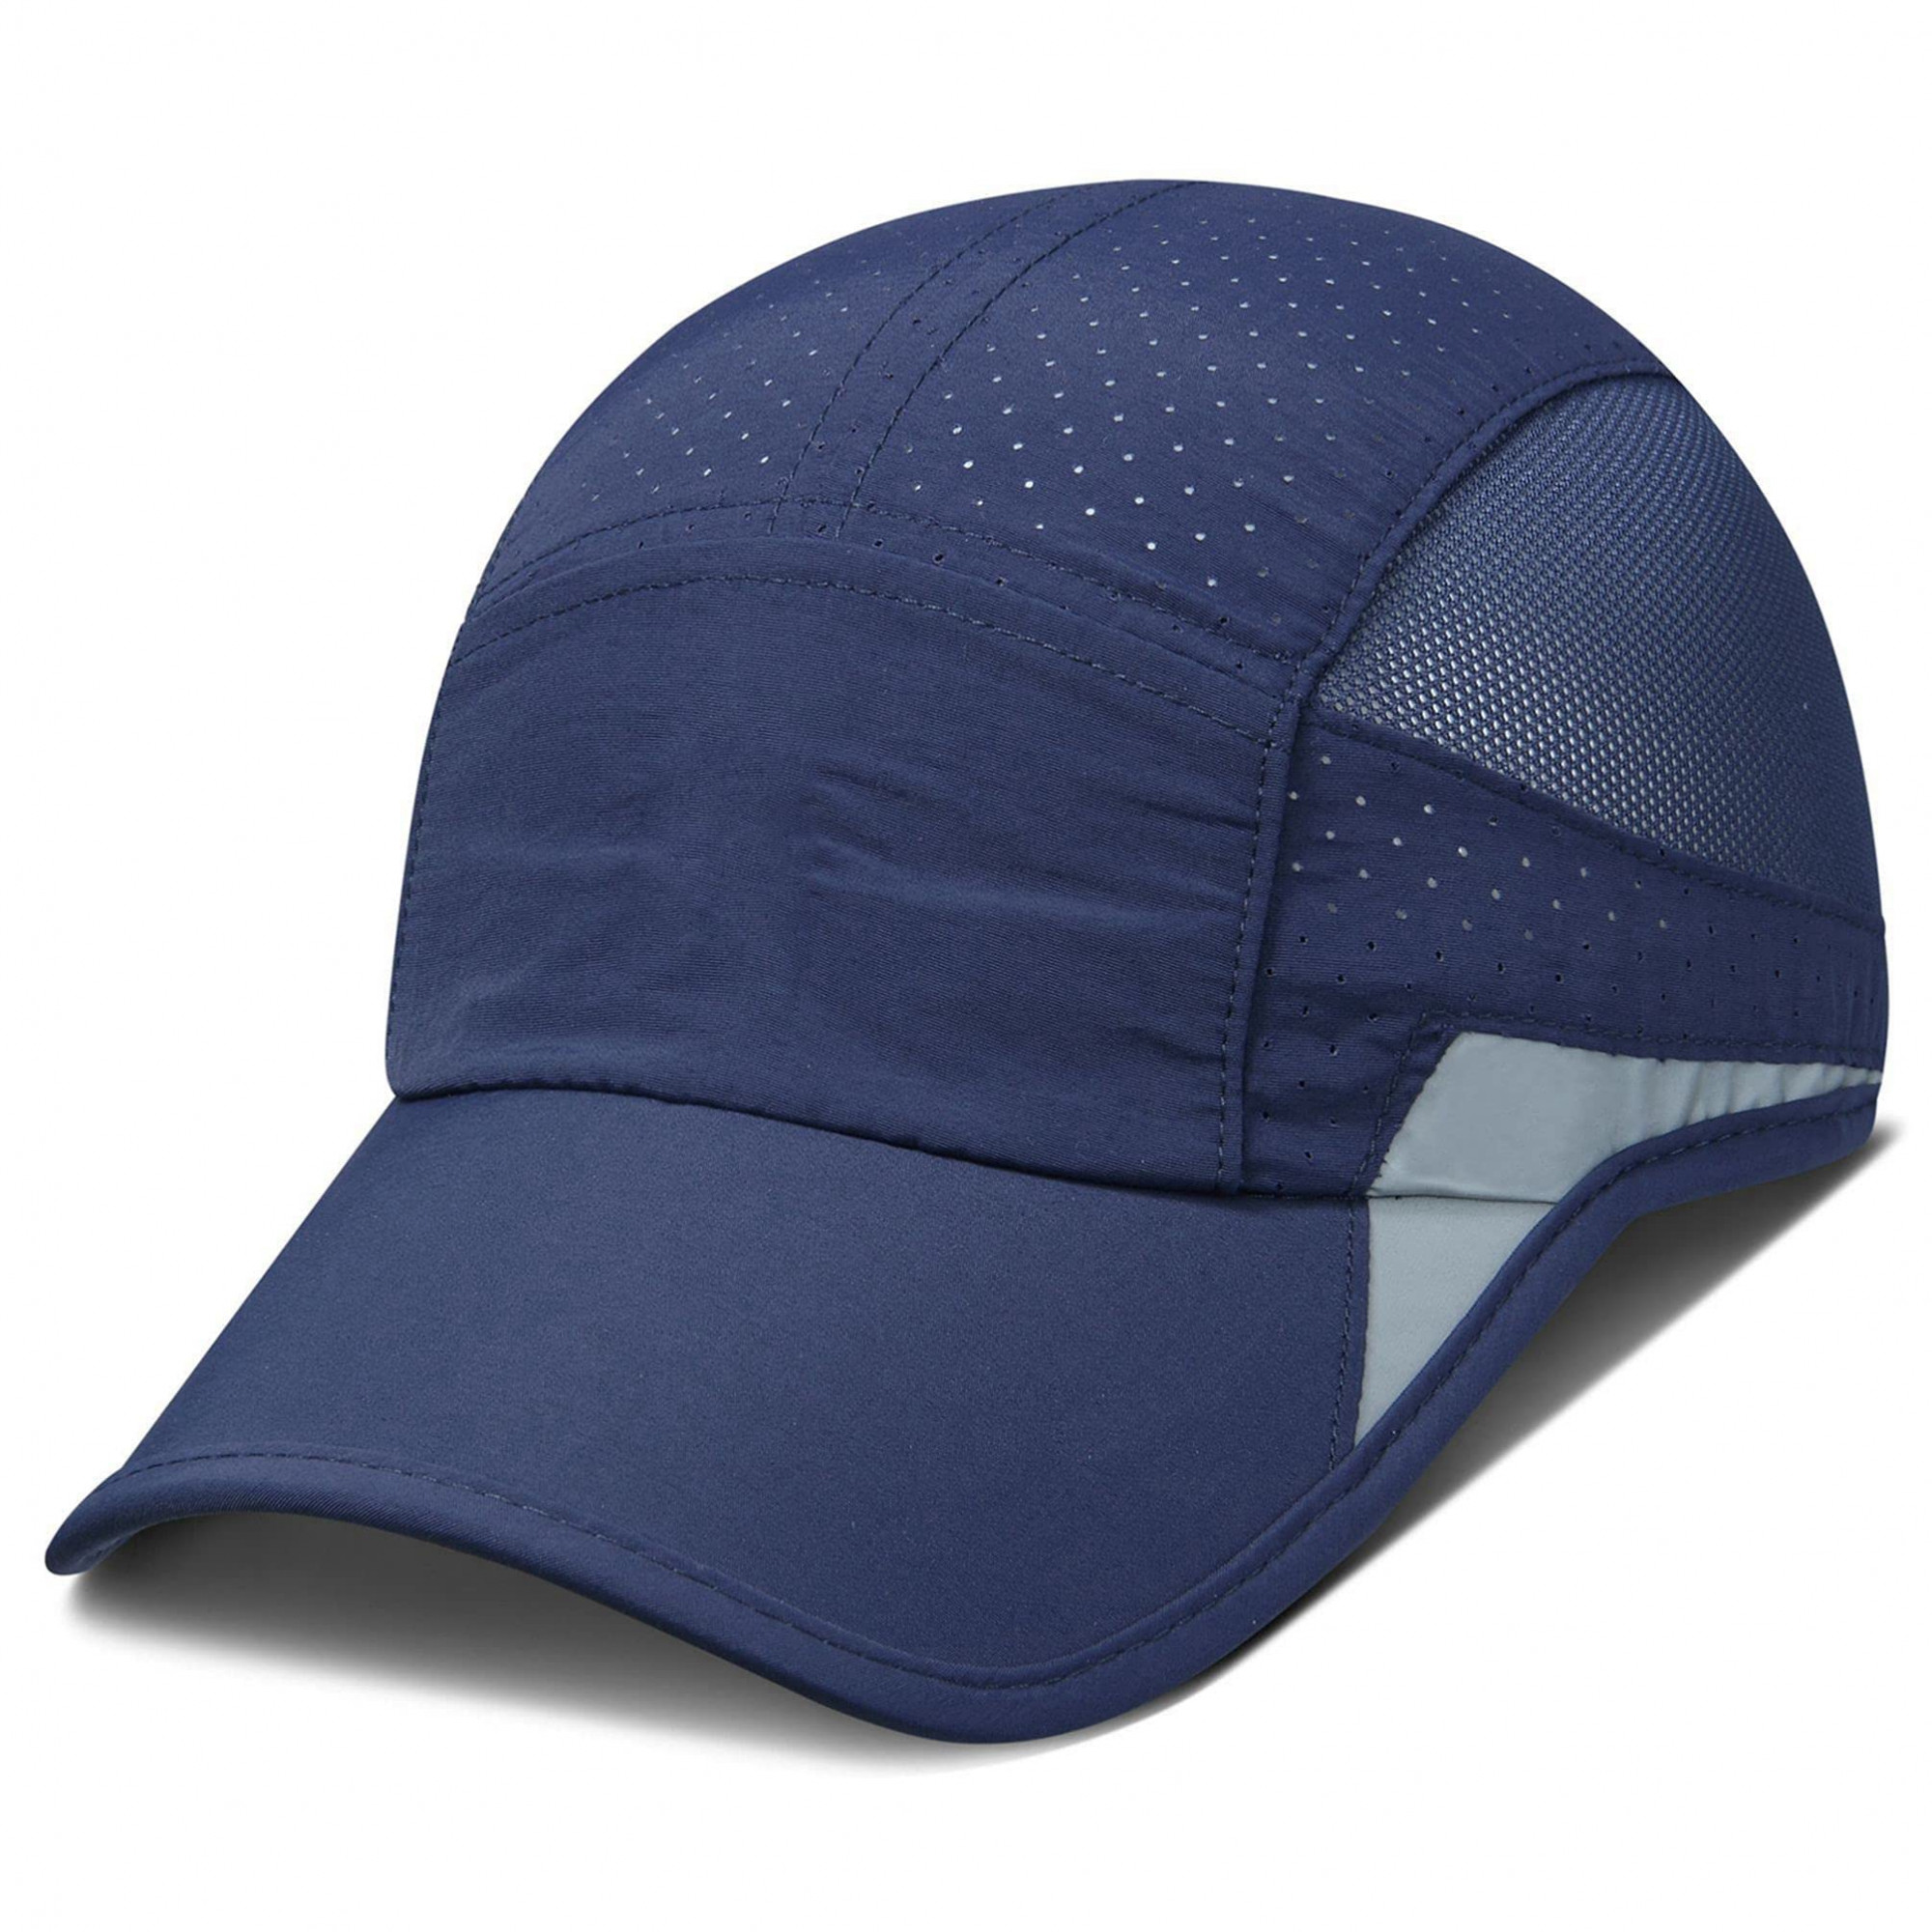 HSR Unstructured Reflective Lightweight Breathable Stylish Sports Soft Hat Cap  for Men and Women (Navy Blue)